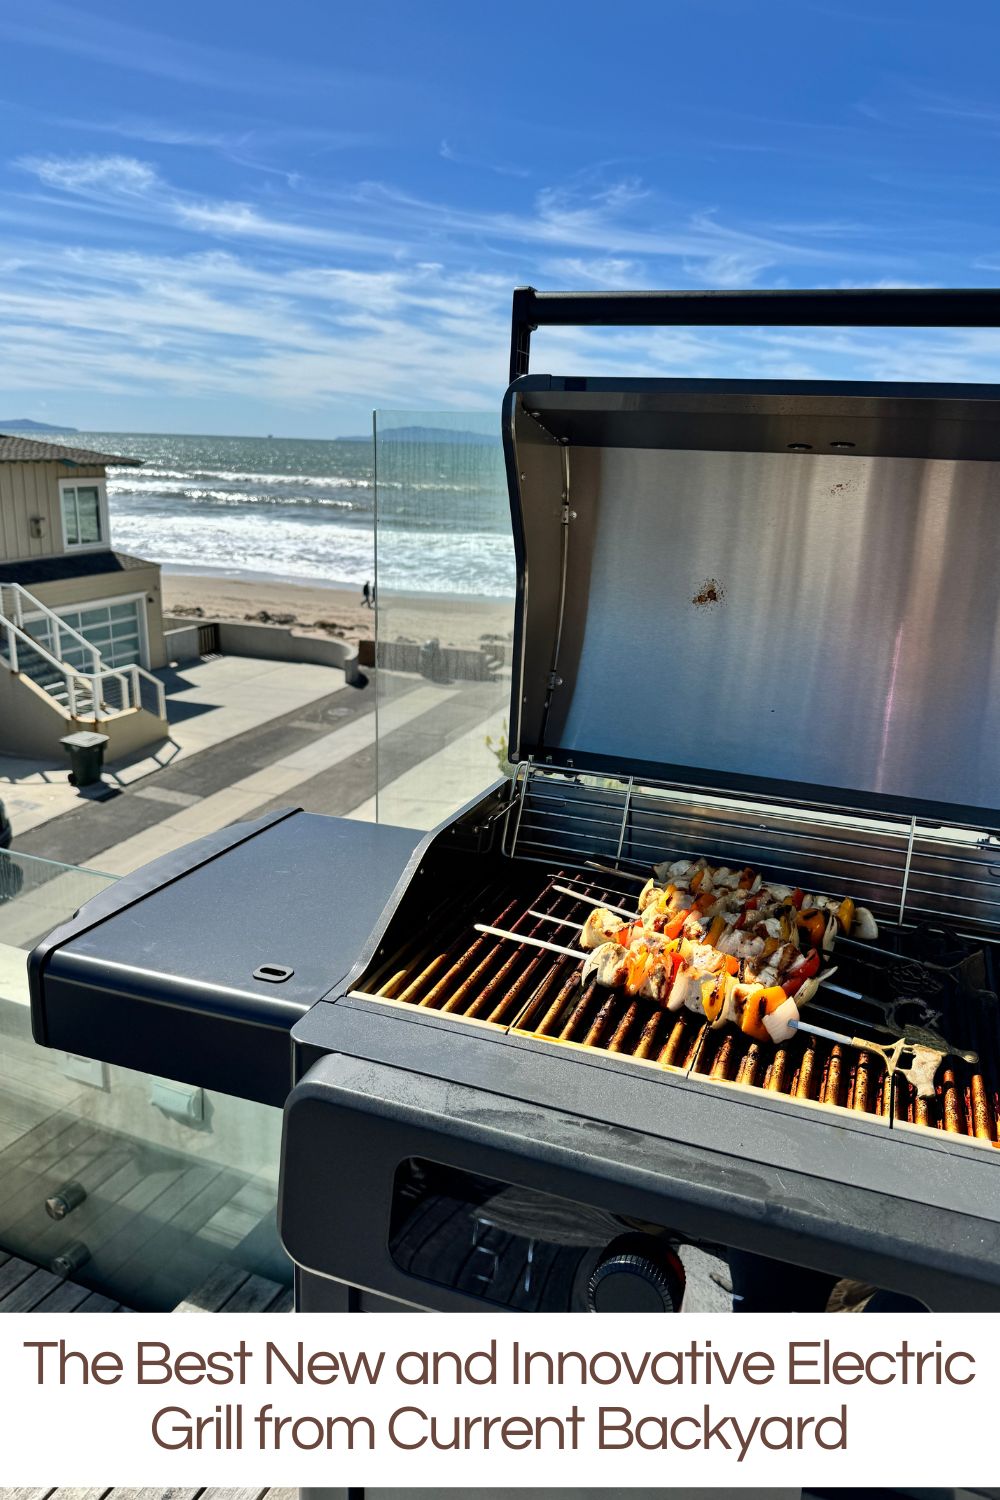 Meet the Current Backyard Model G Dual Zone Electric Grill, a new piece of culinary equipment that's changing the way we think about outdoor cooking. 